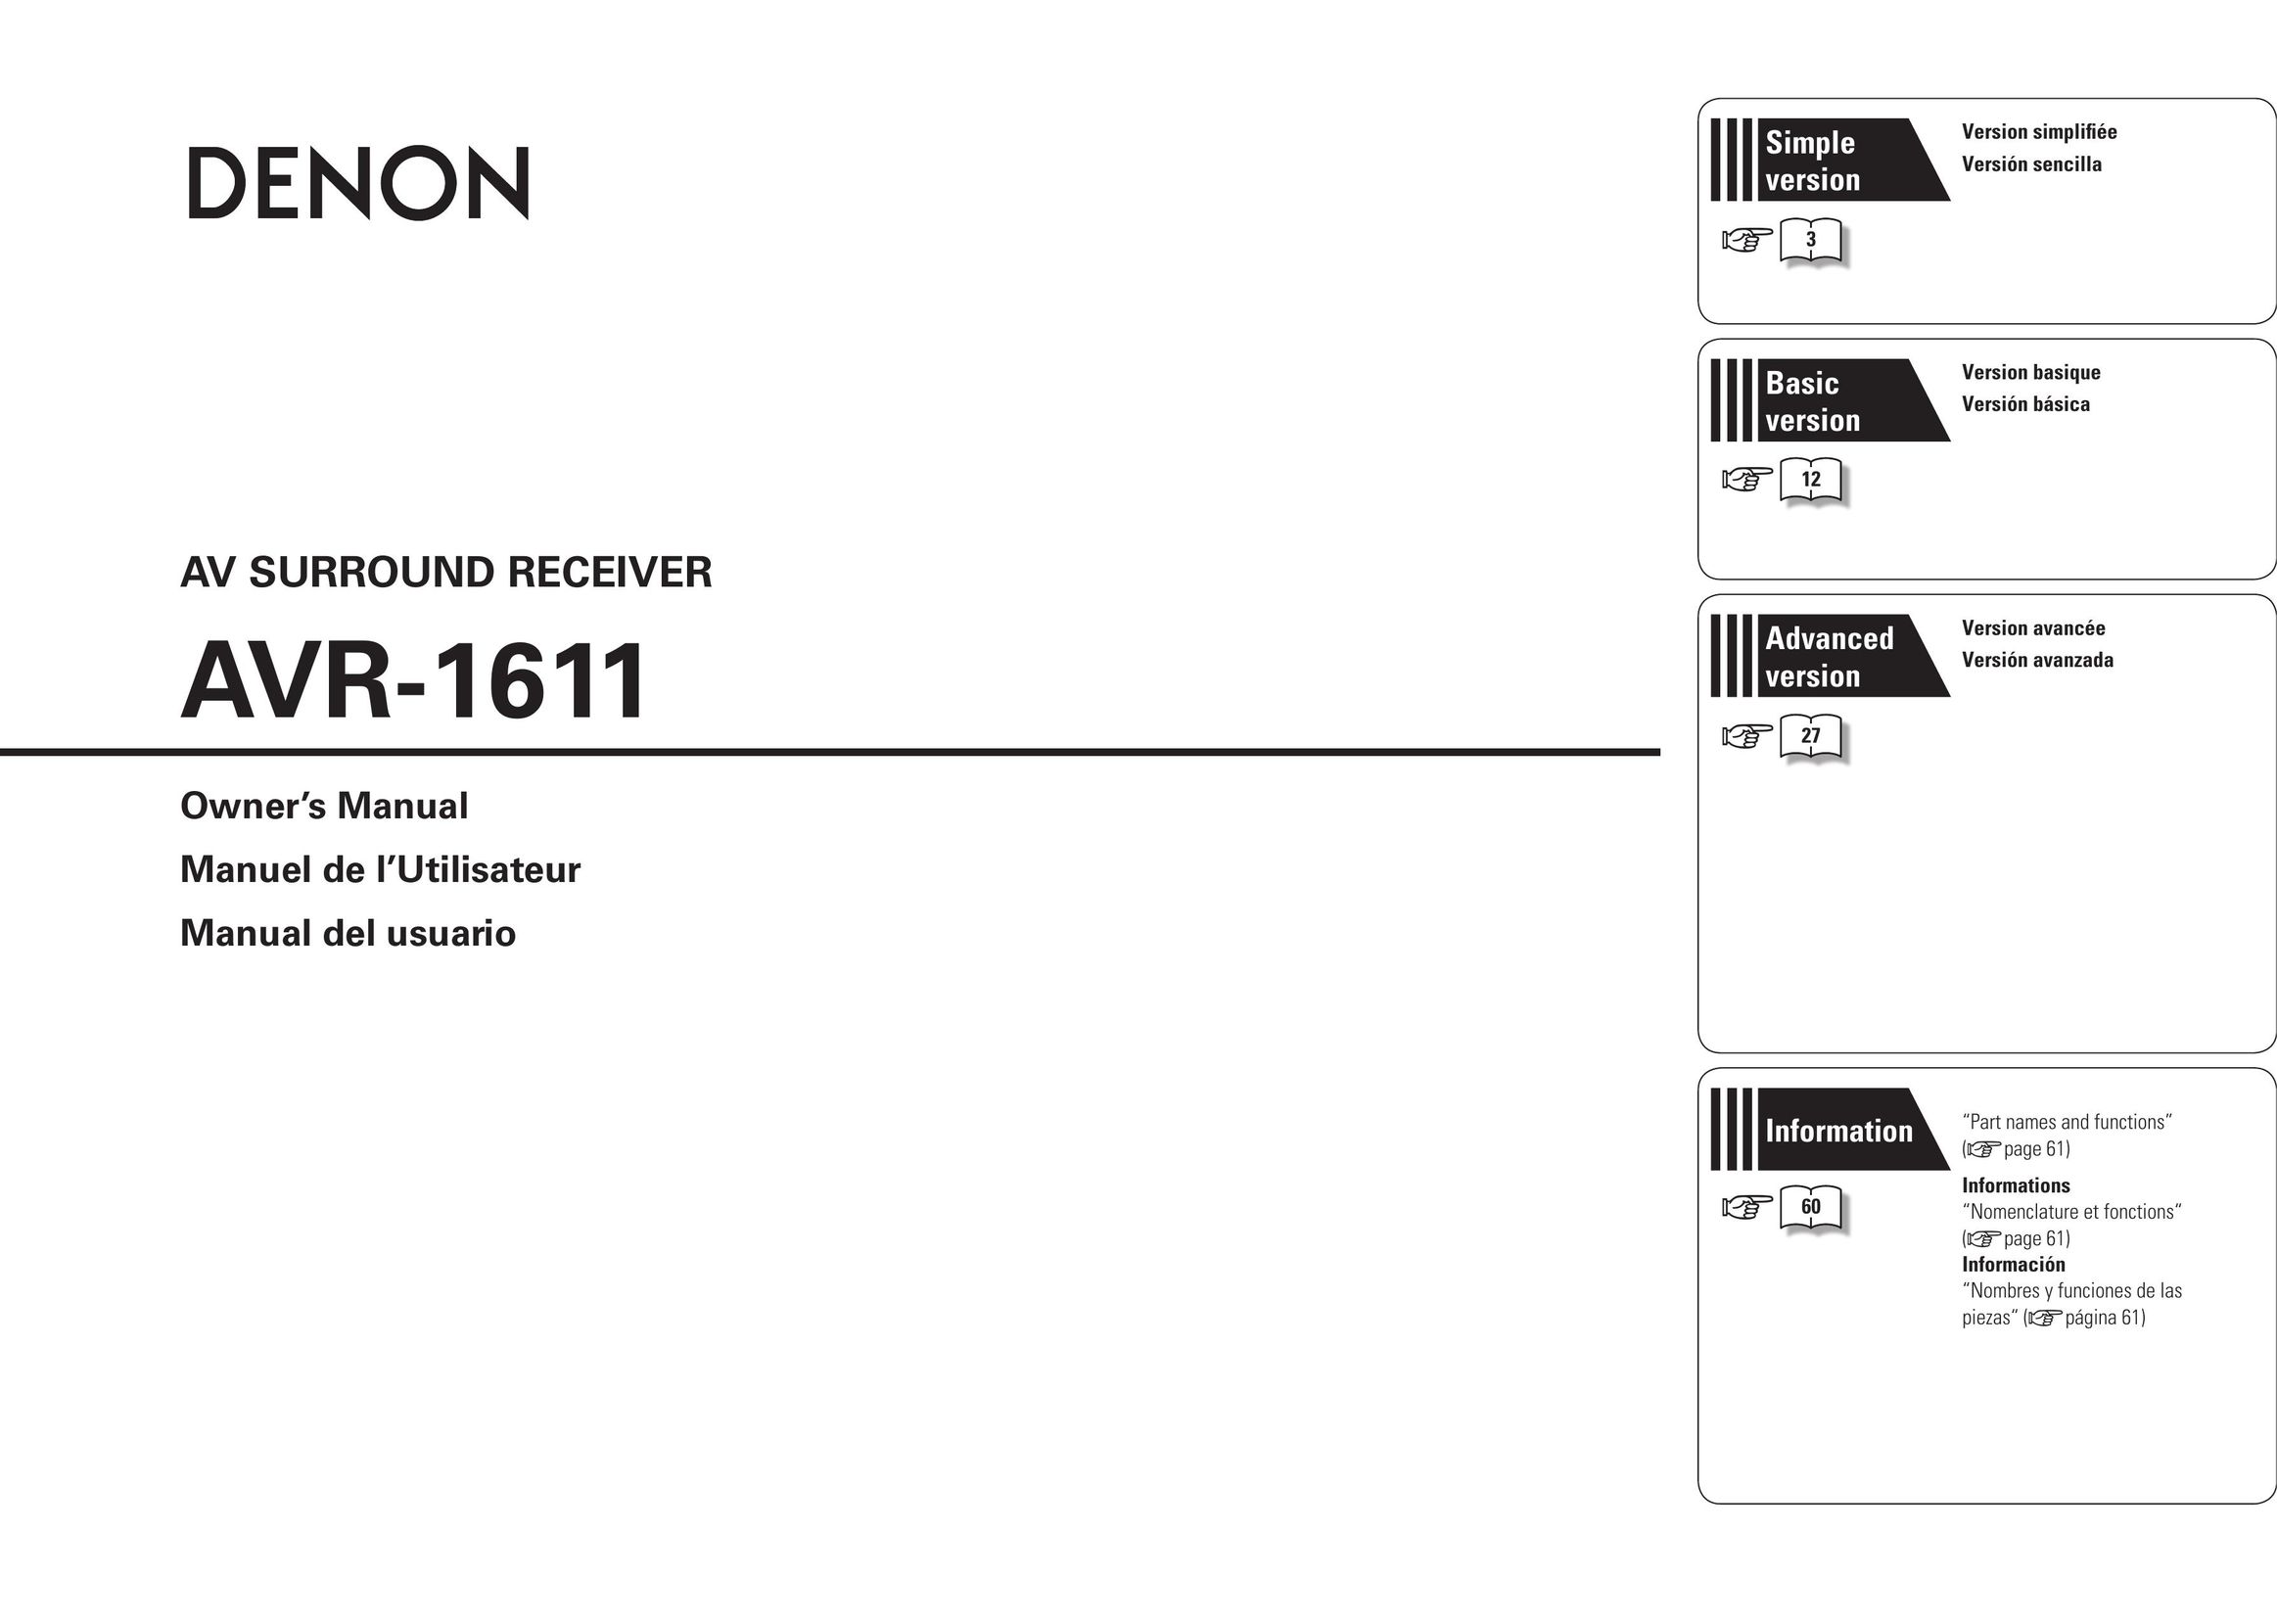 Denon AVR-1611 Home Theater System User Manual